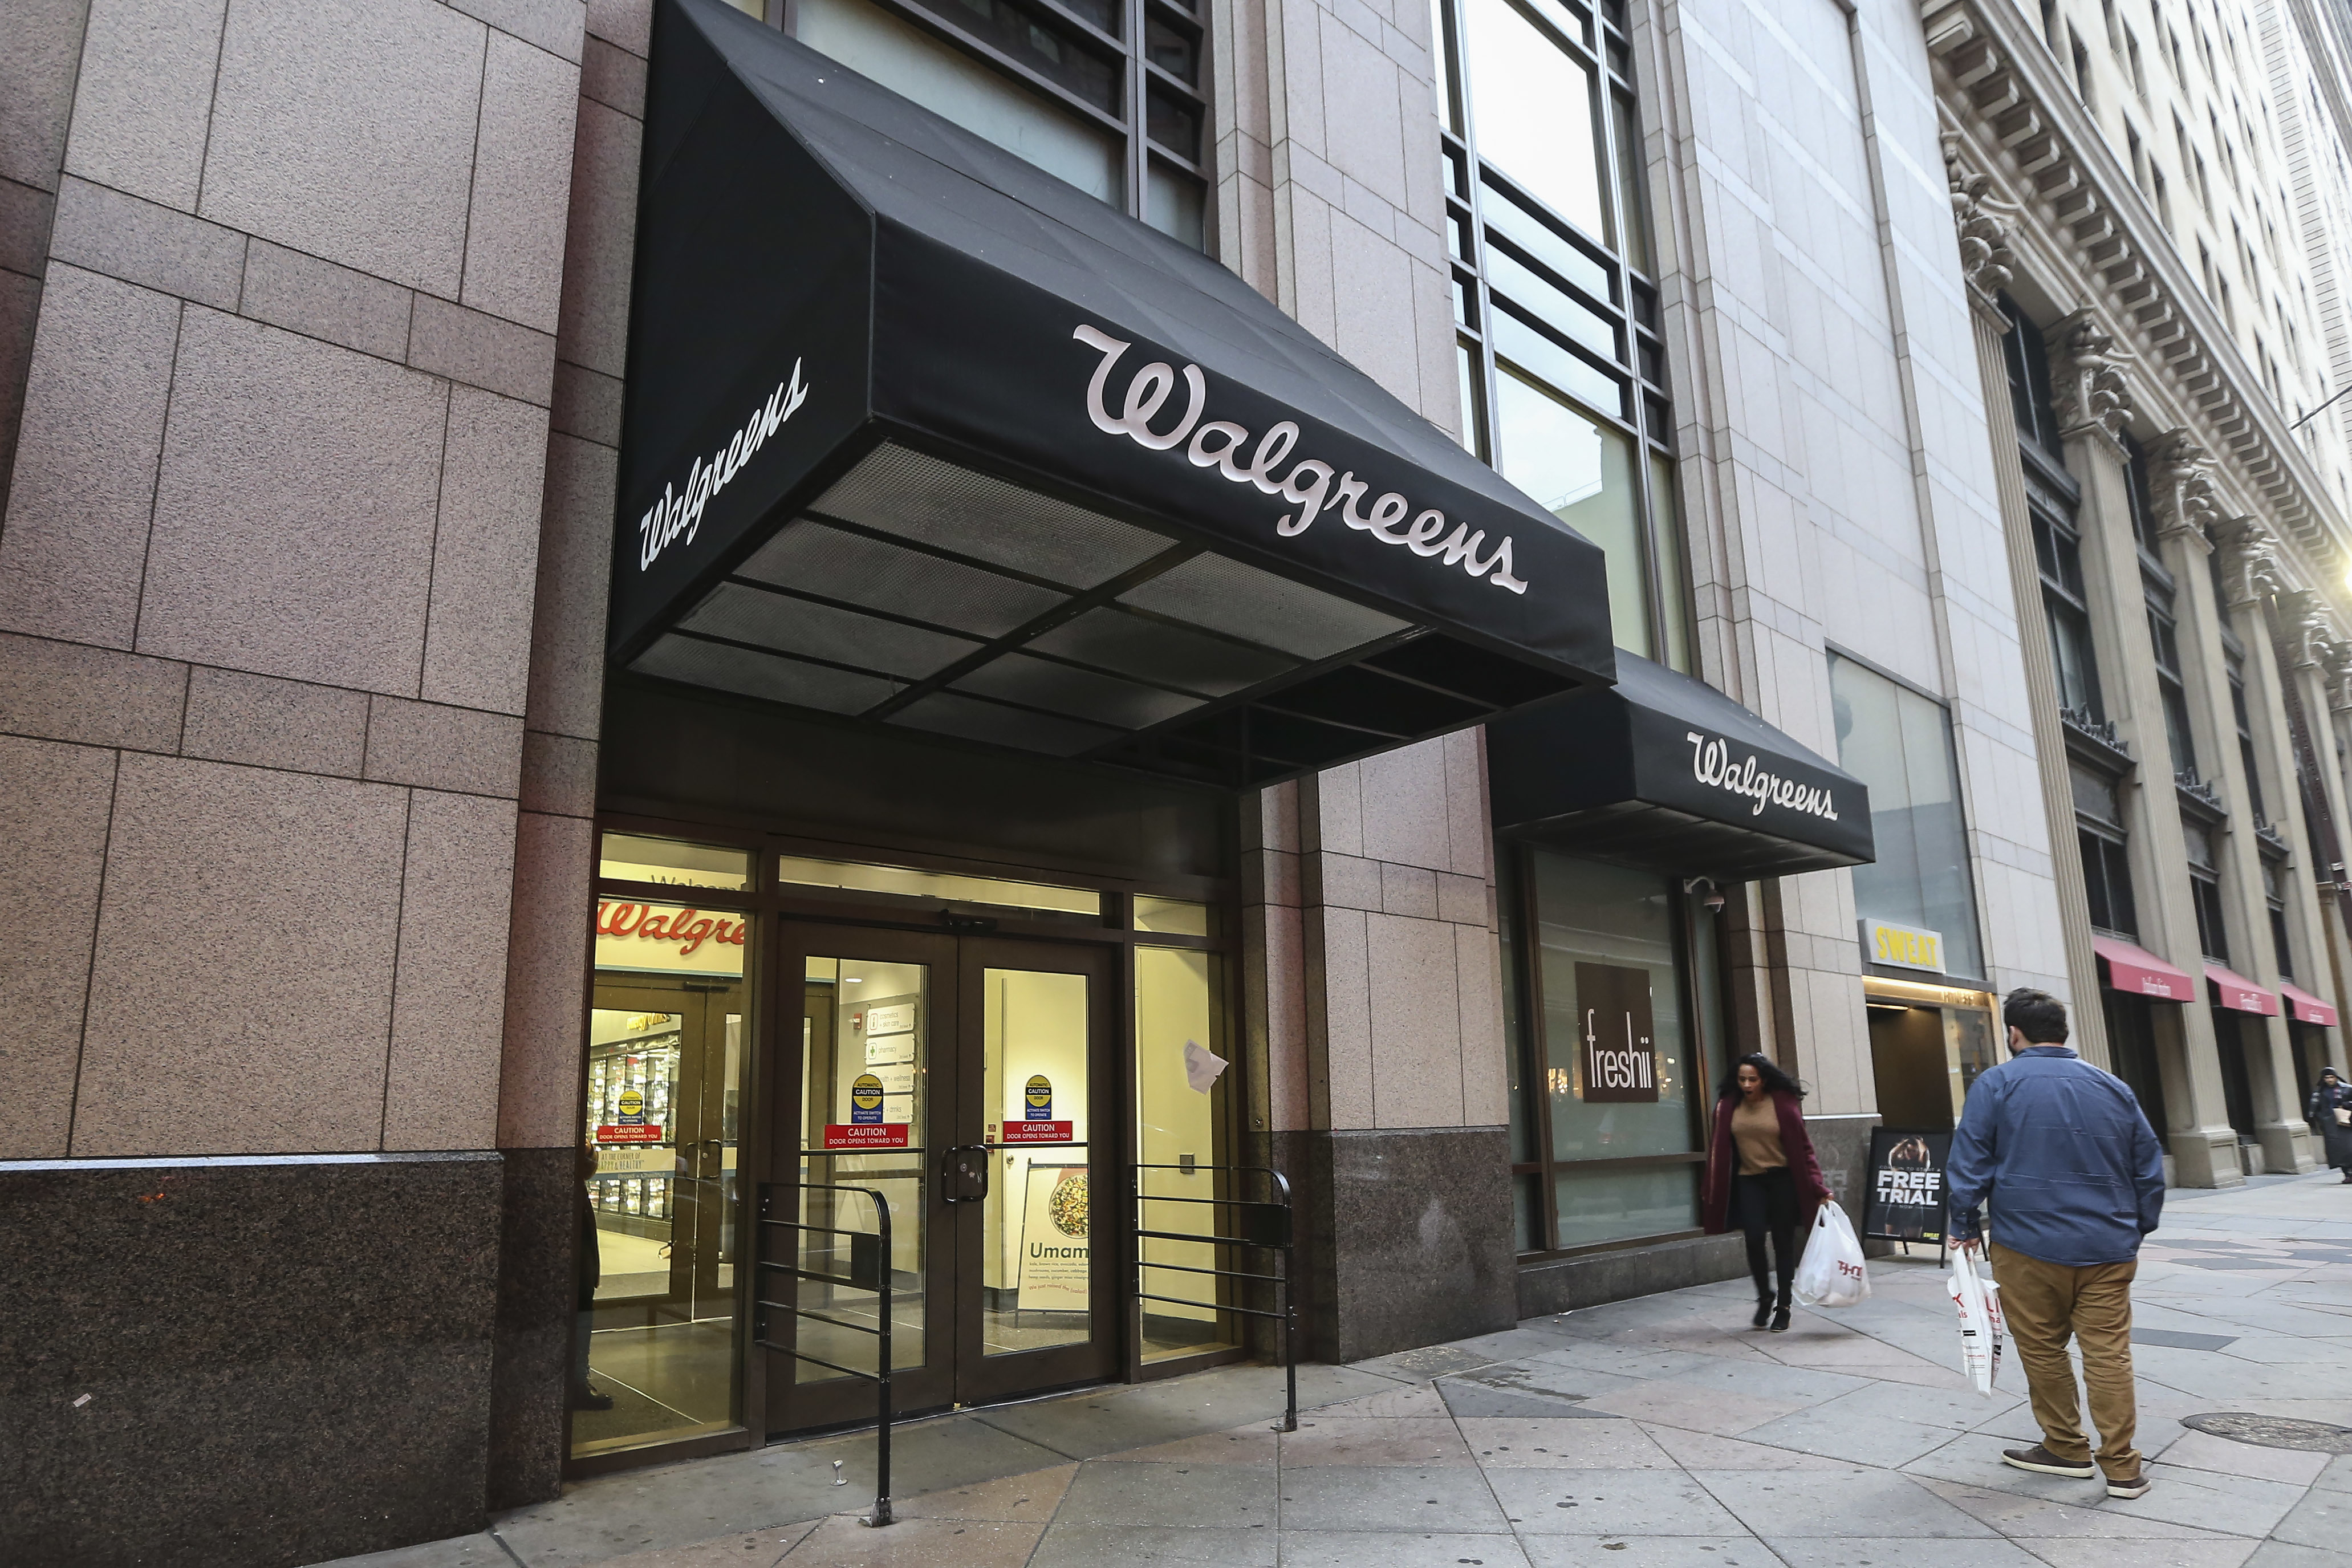 Walgreens 'superstore' on Philly's Broad Street will shutter in February